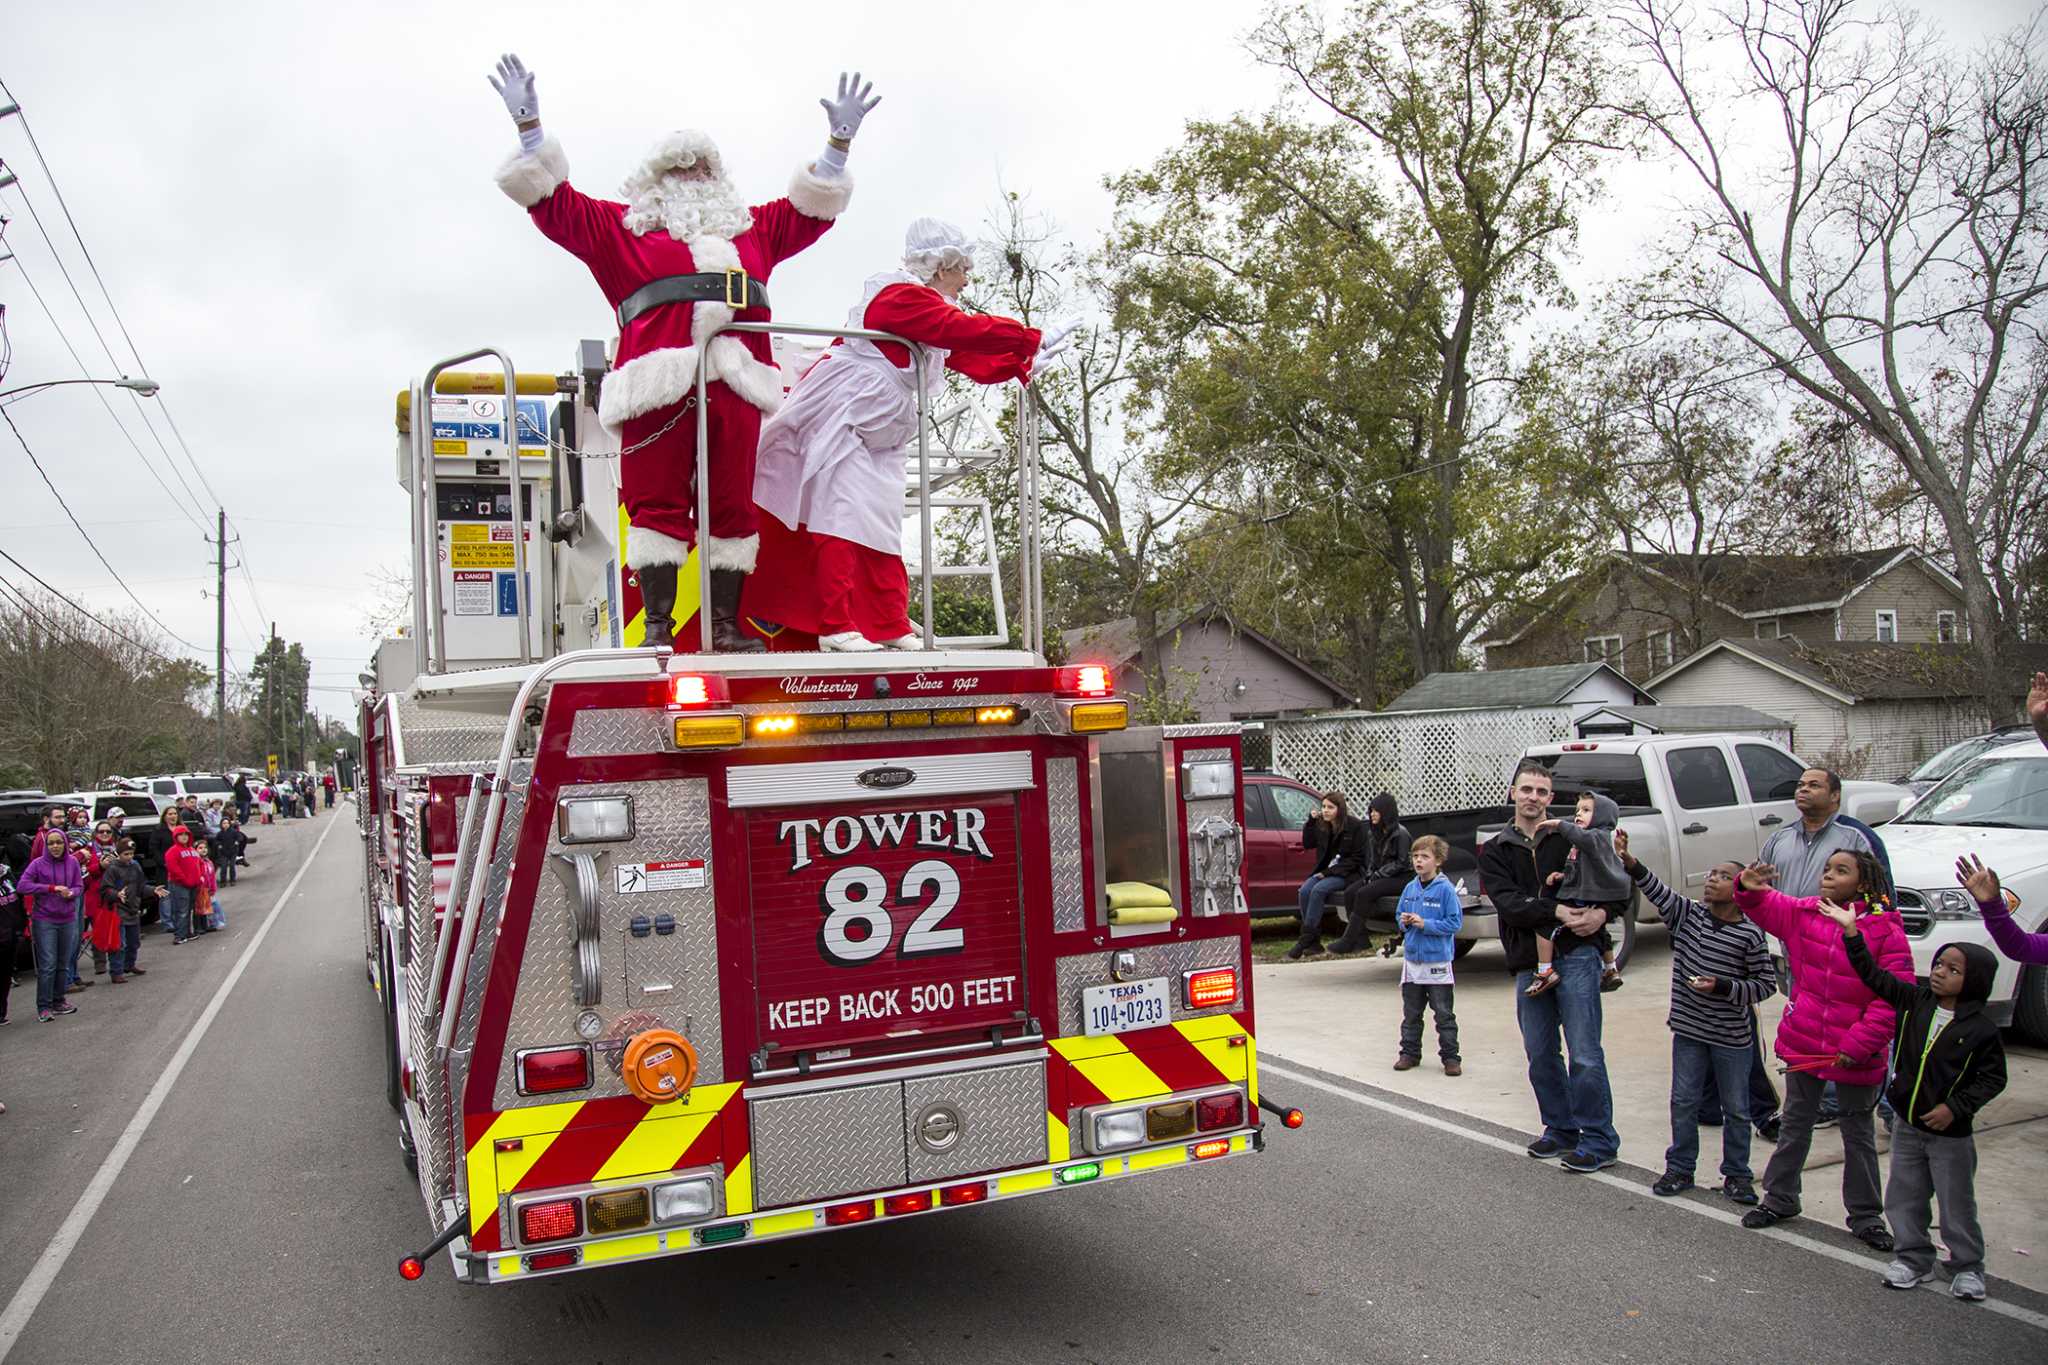 Community invited to 19th annual Crosby Christmas parade, festival